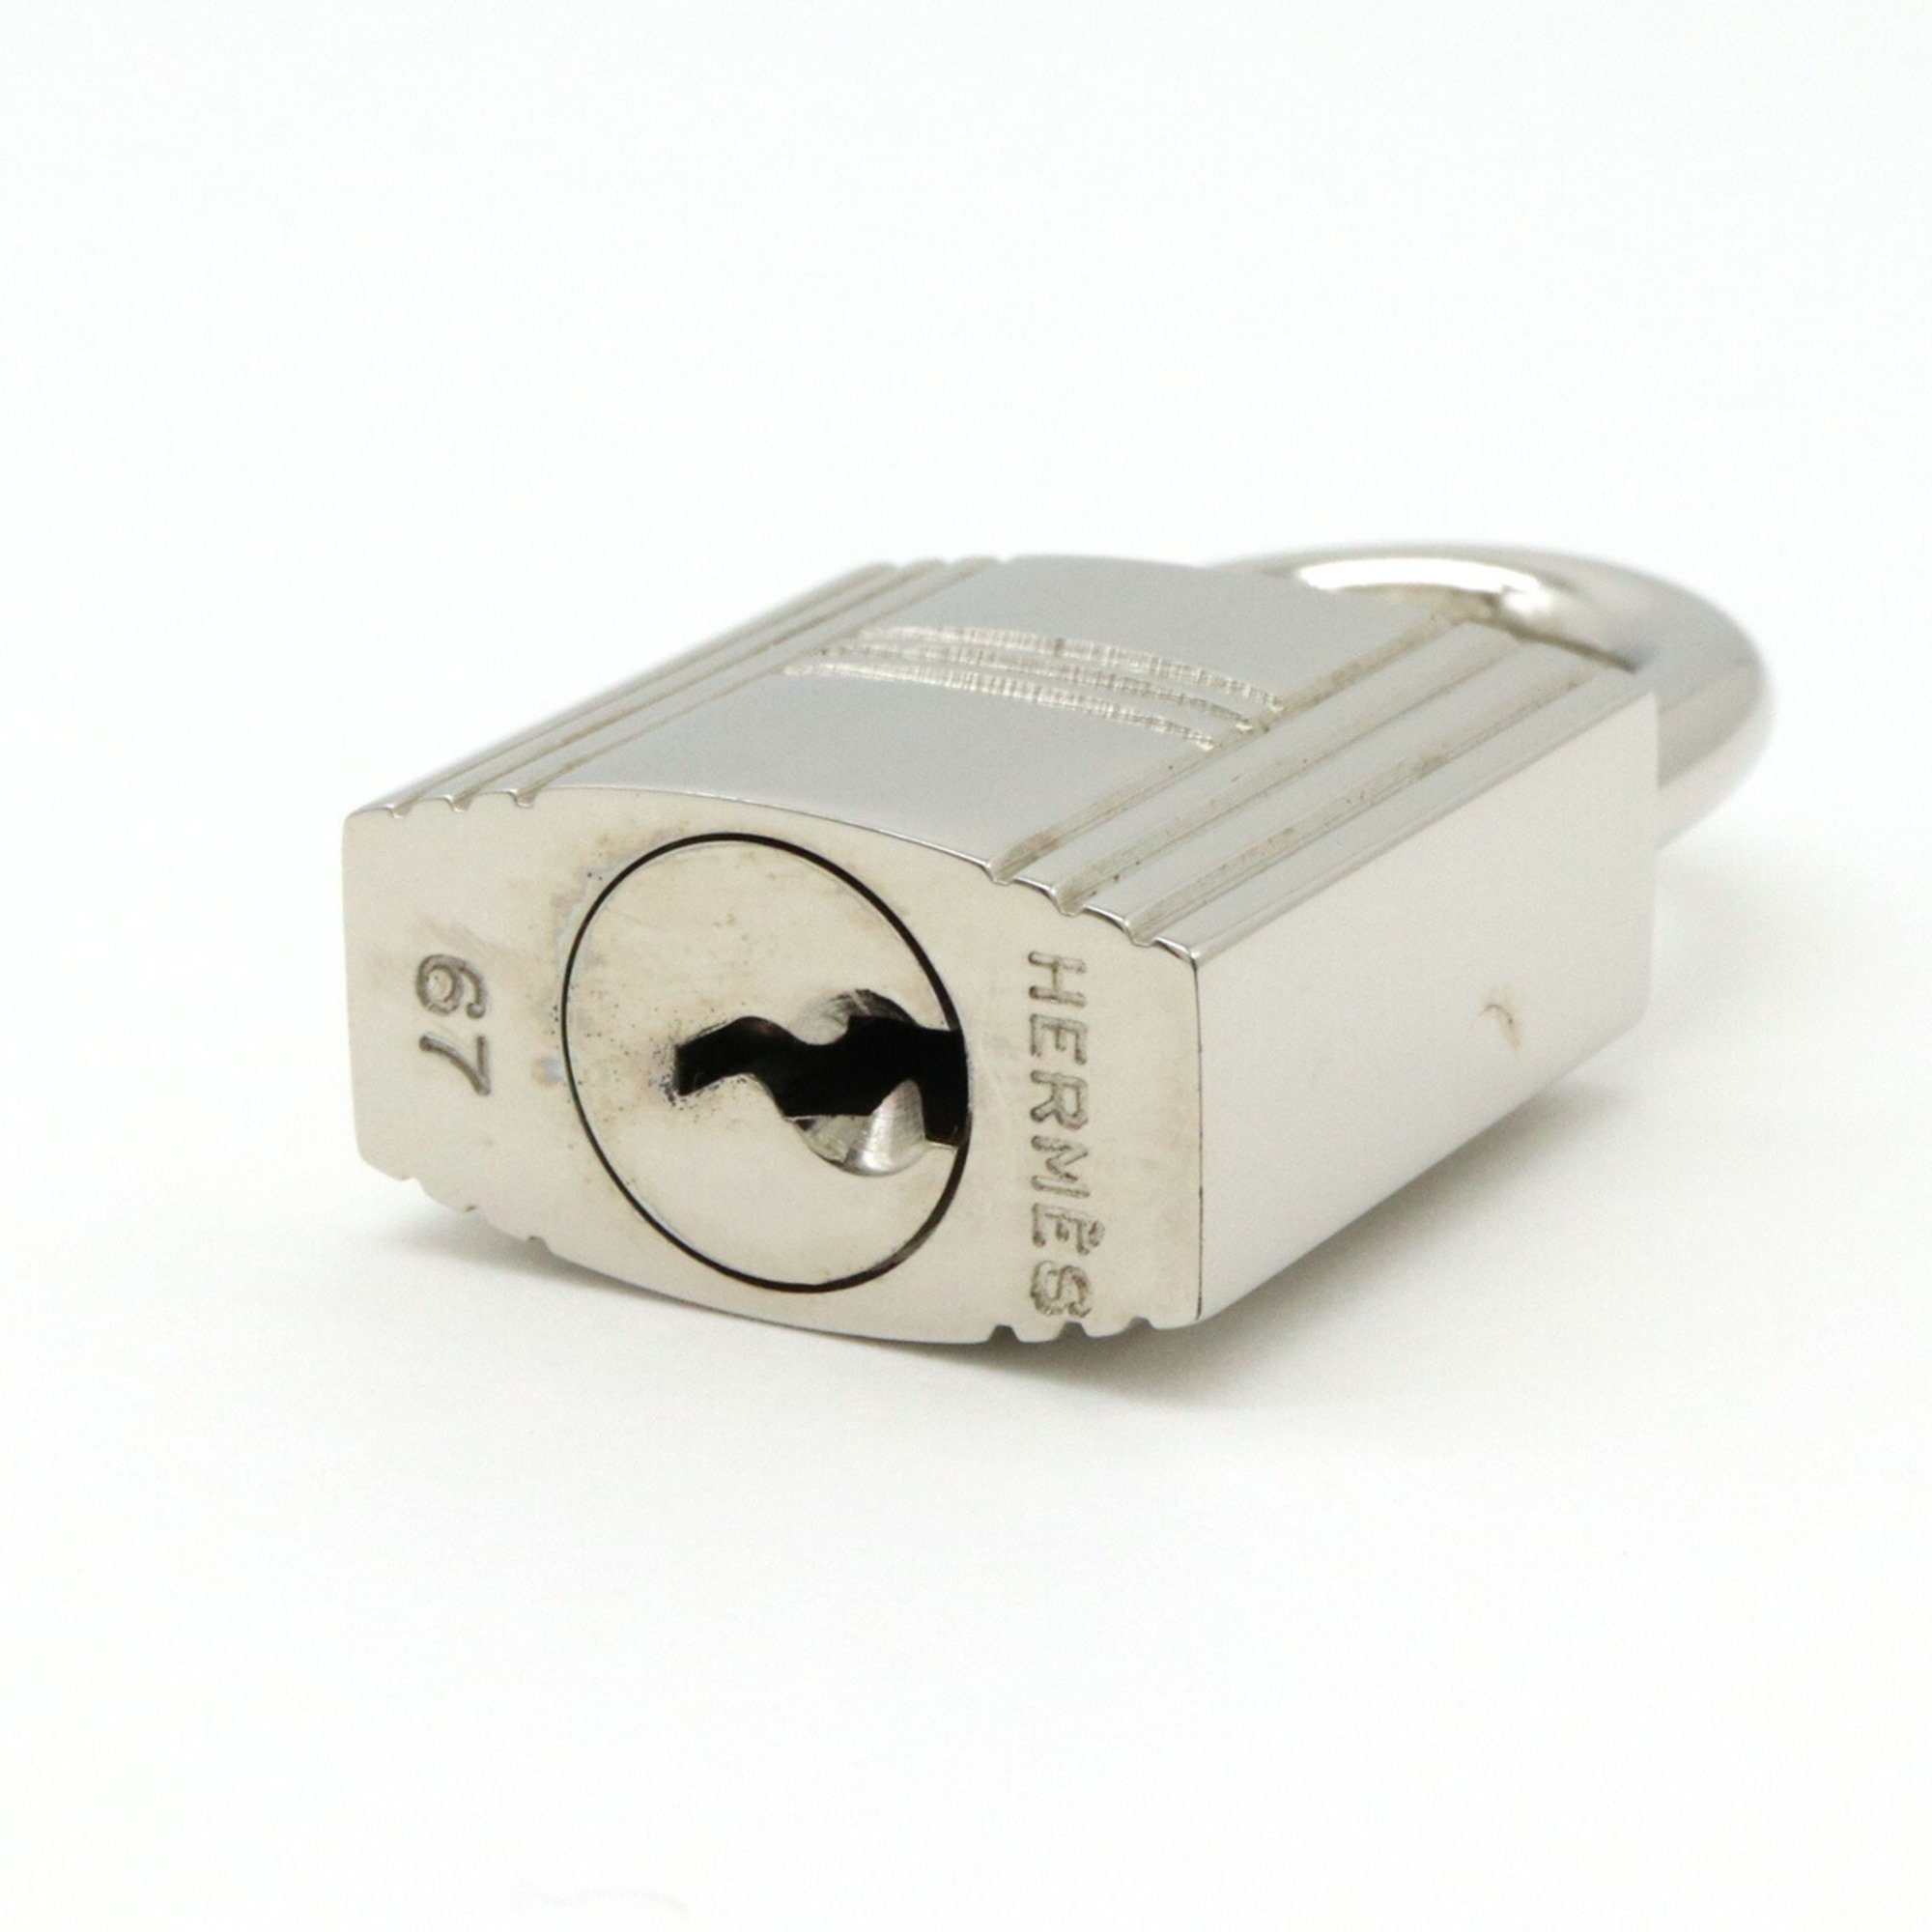 HERMES Padlock No.67 with Key Silver Color